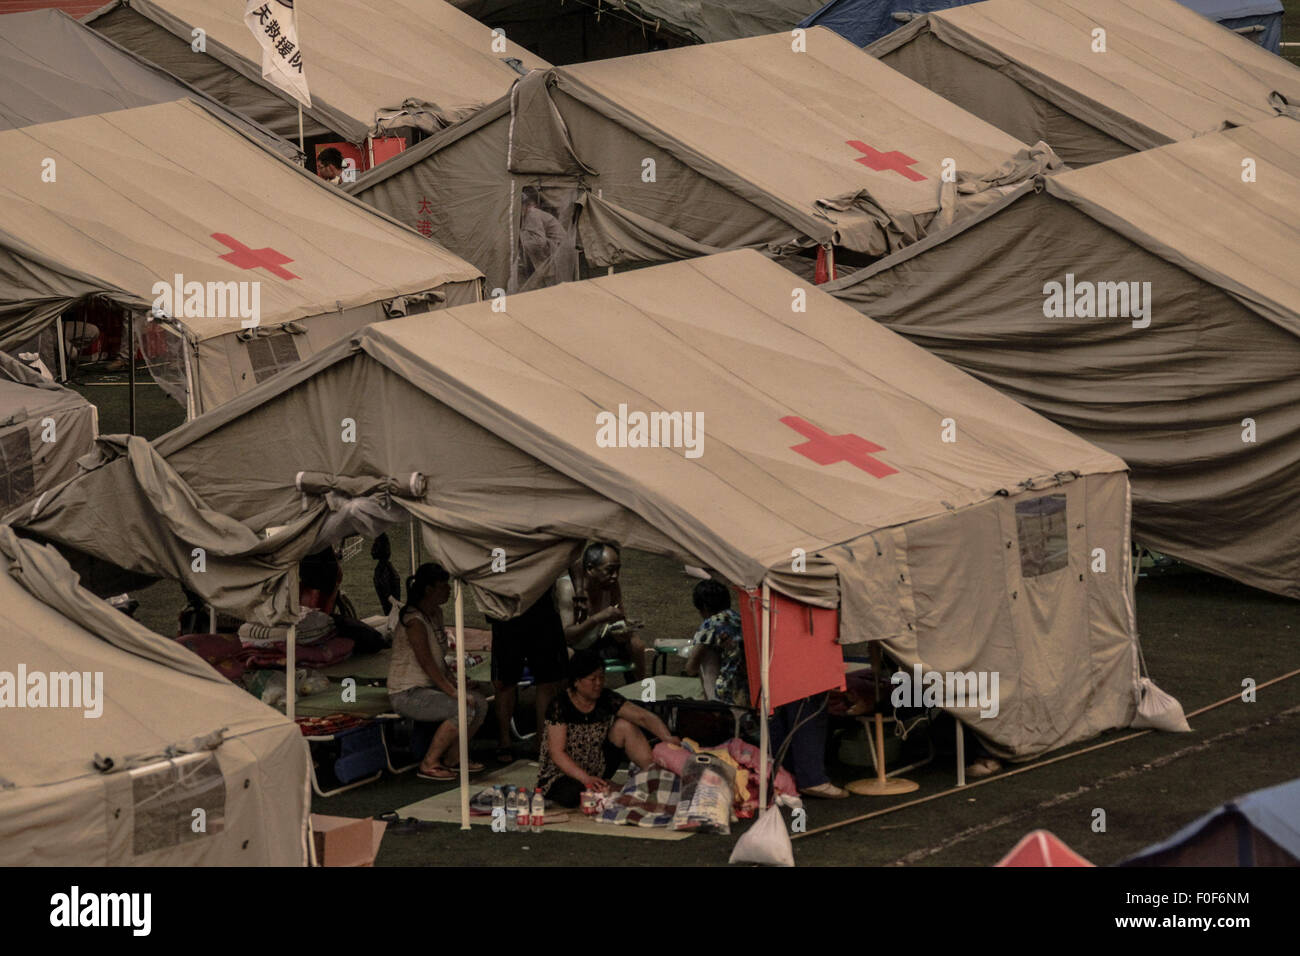 (150814) -- TIANJIN, Aug. 14, 2015 (Xinhua) -- Photo taken on Aug. 14, 2015 shows a temporary shelter set up after the warehouse explosion in Tianjin, north China. Drinking water, food, clothes and quilts are adequate at the shelter. (Xinhua/Zheng Huansong)(mcg) Stock Photo